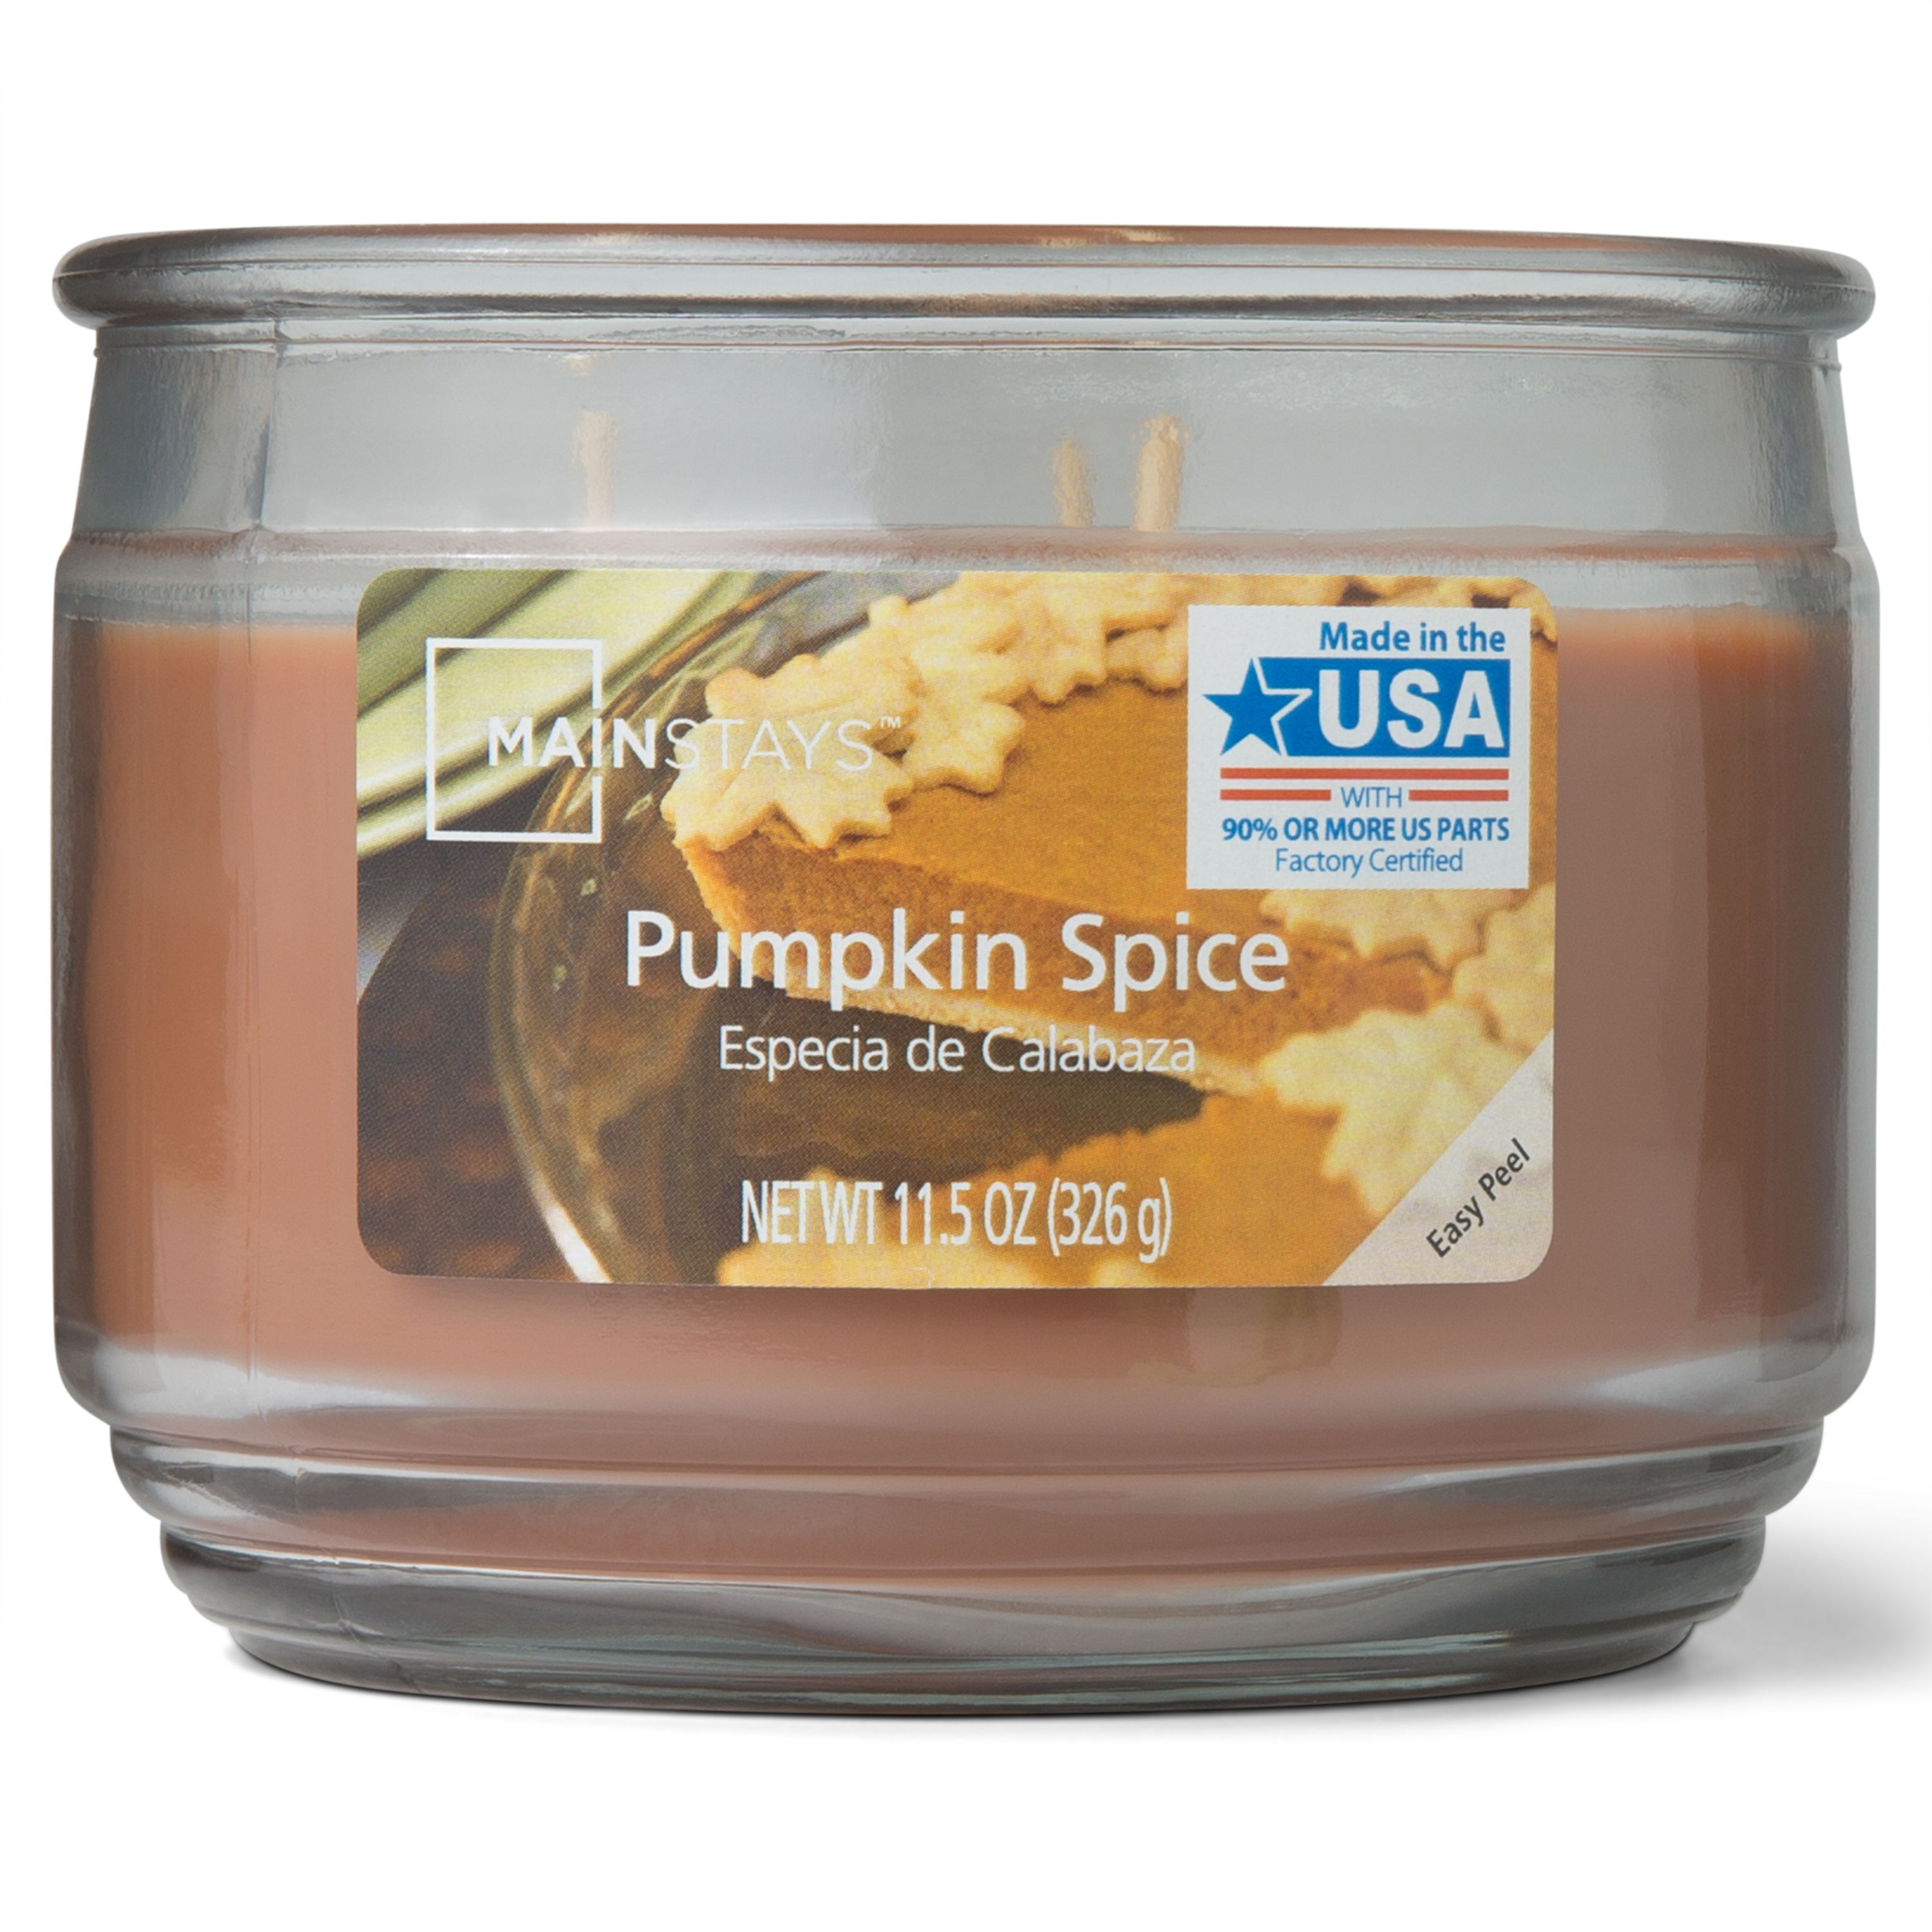 Mainstays Pumpkin Spice 3-Wick 11.5 oz. Scented Candle - image 1 of 2